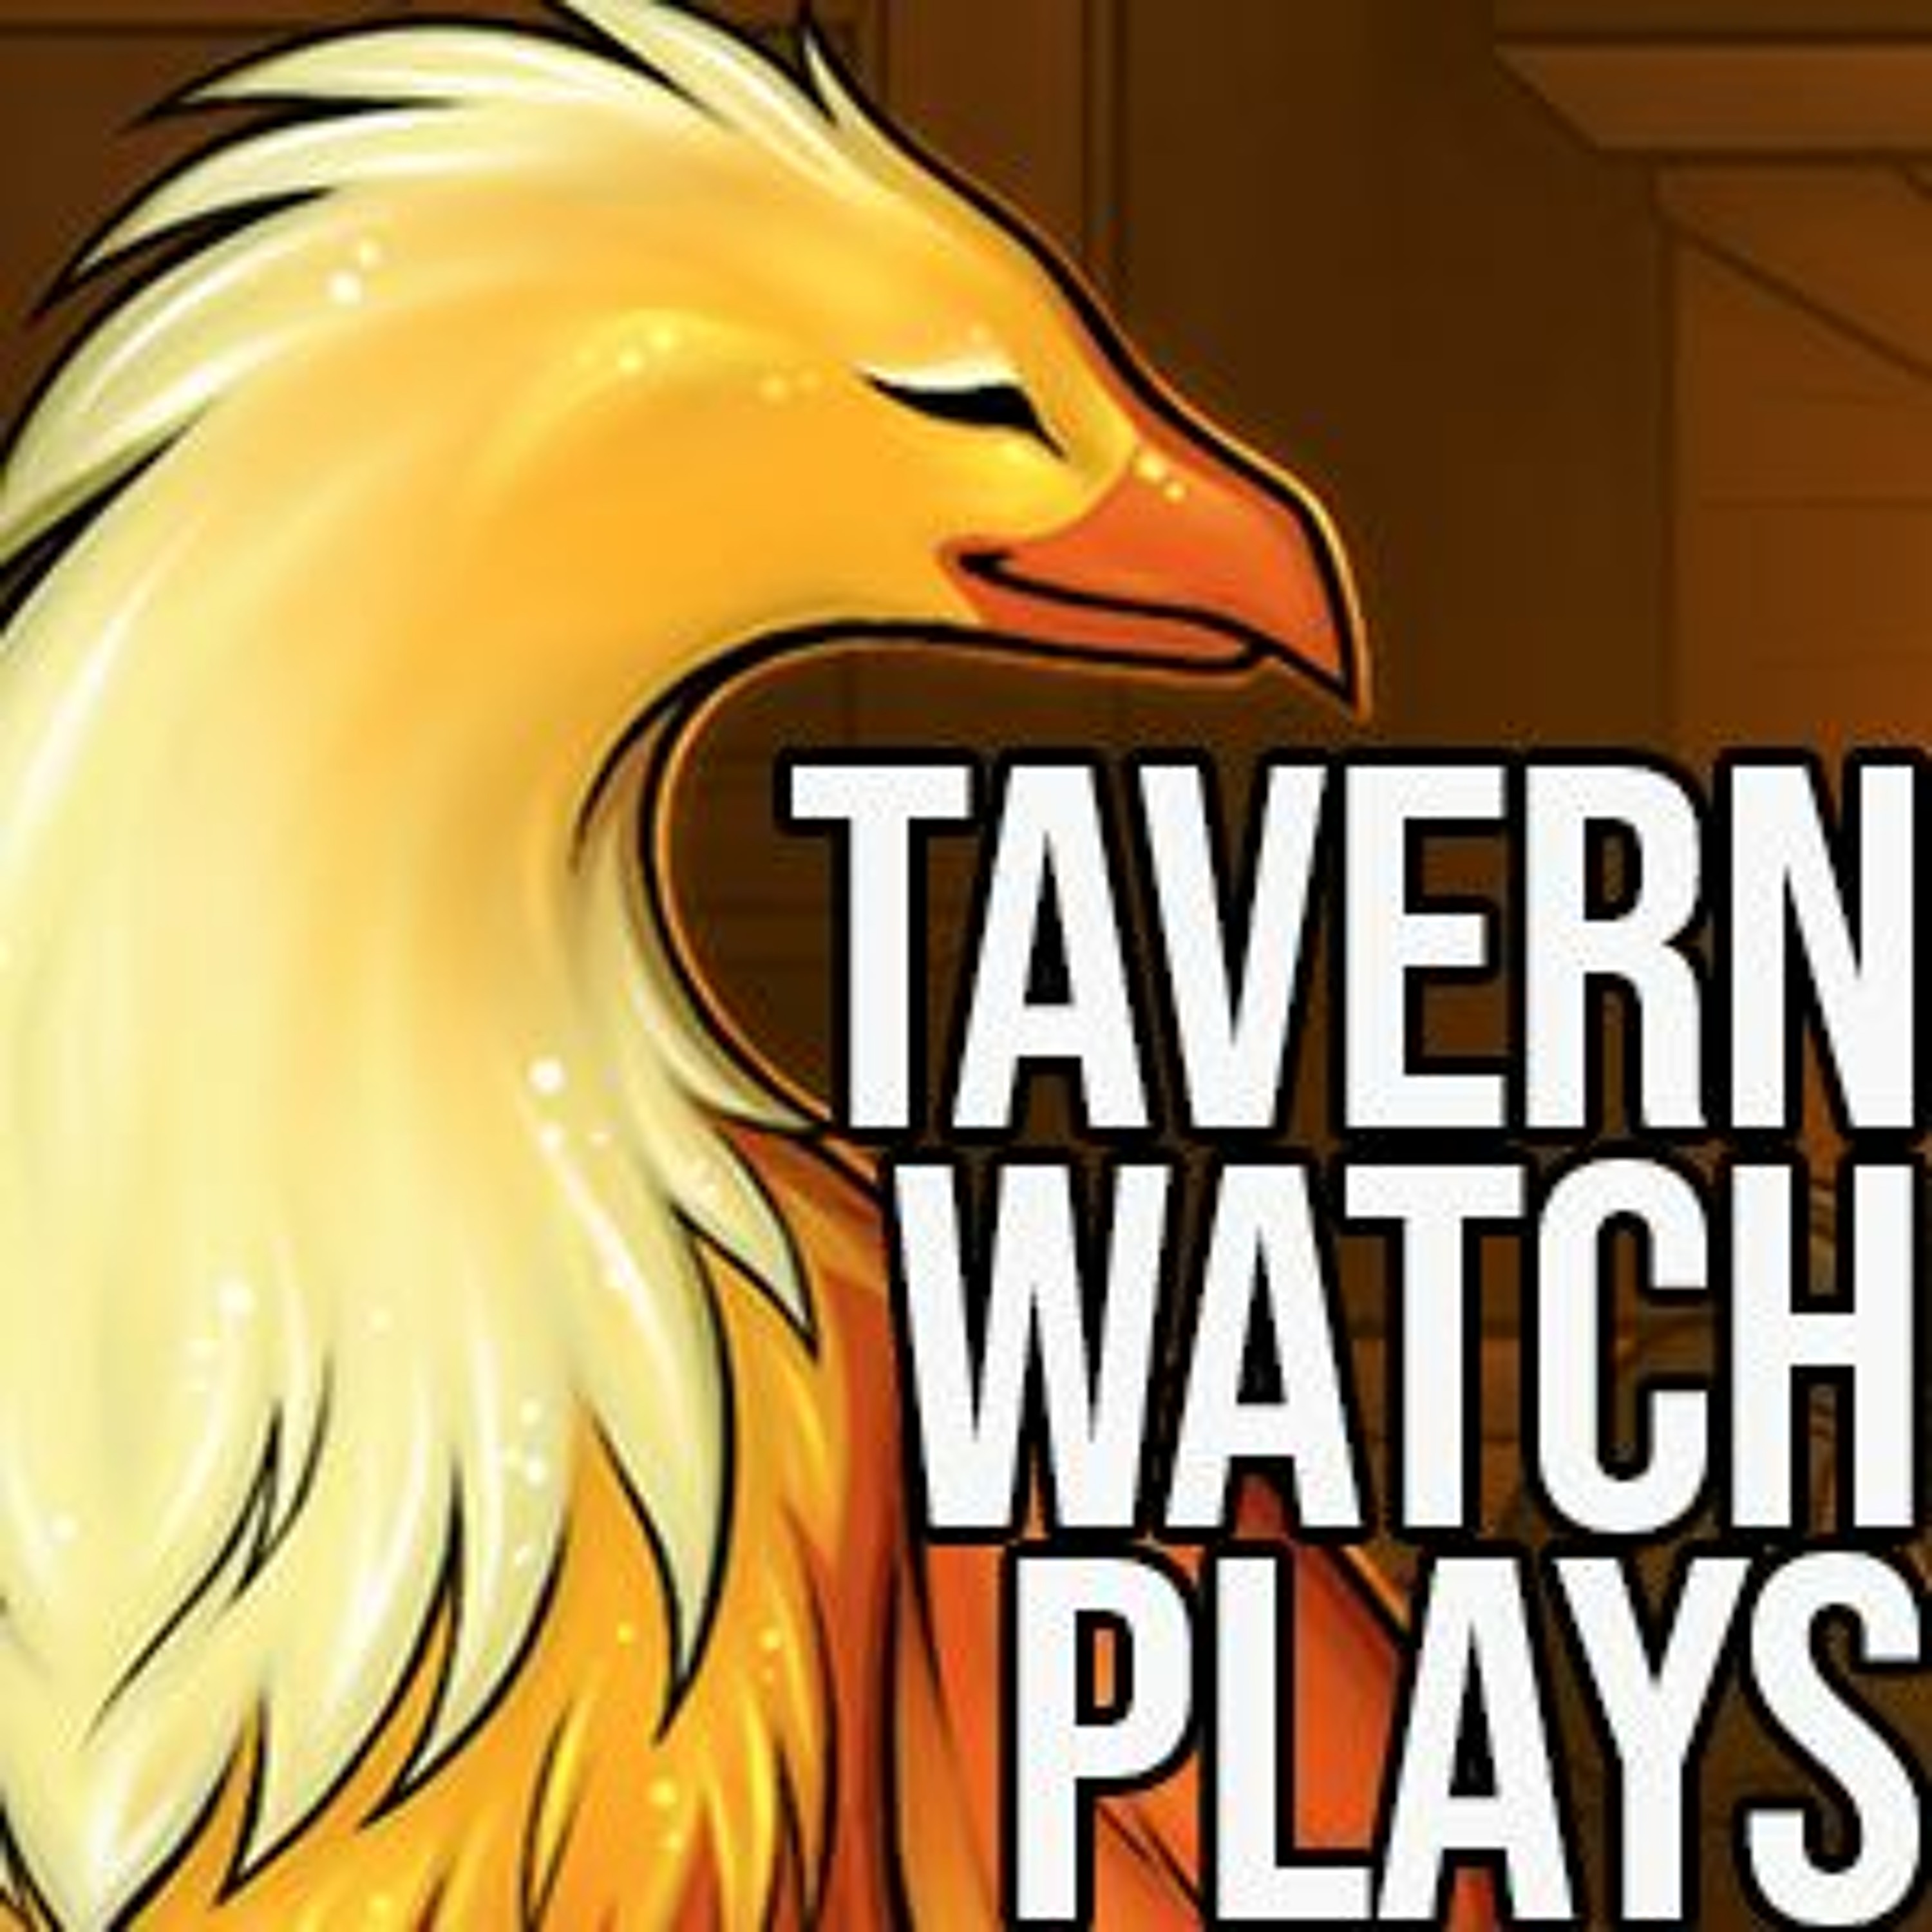 Tavern Watch Plays Weirs 11: And one magical orb to rule them all